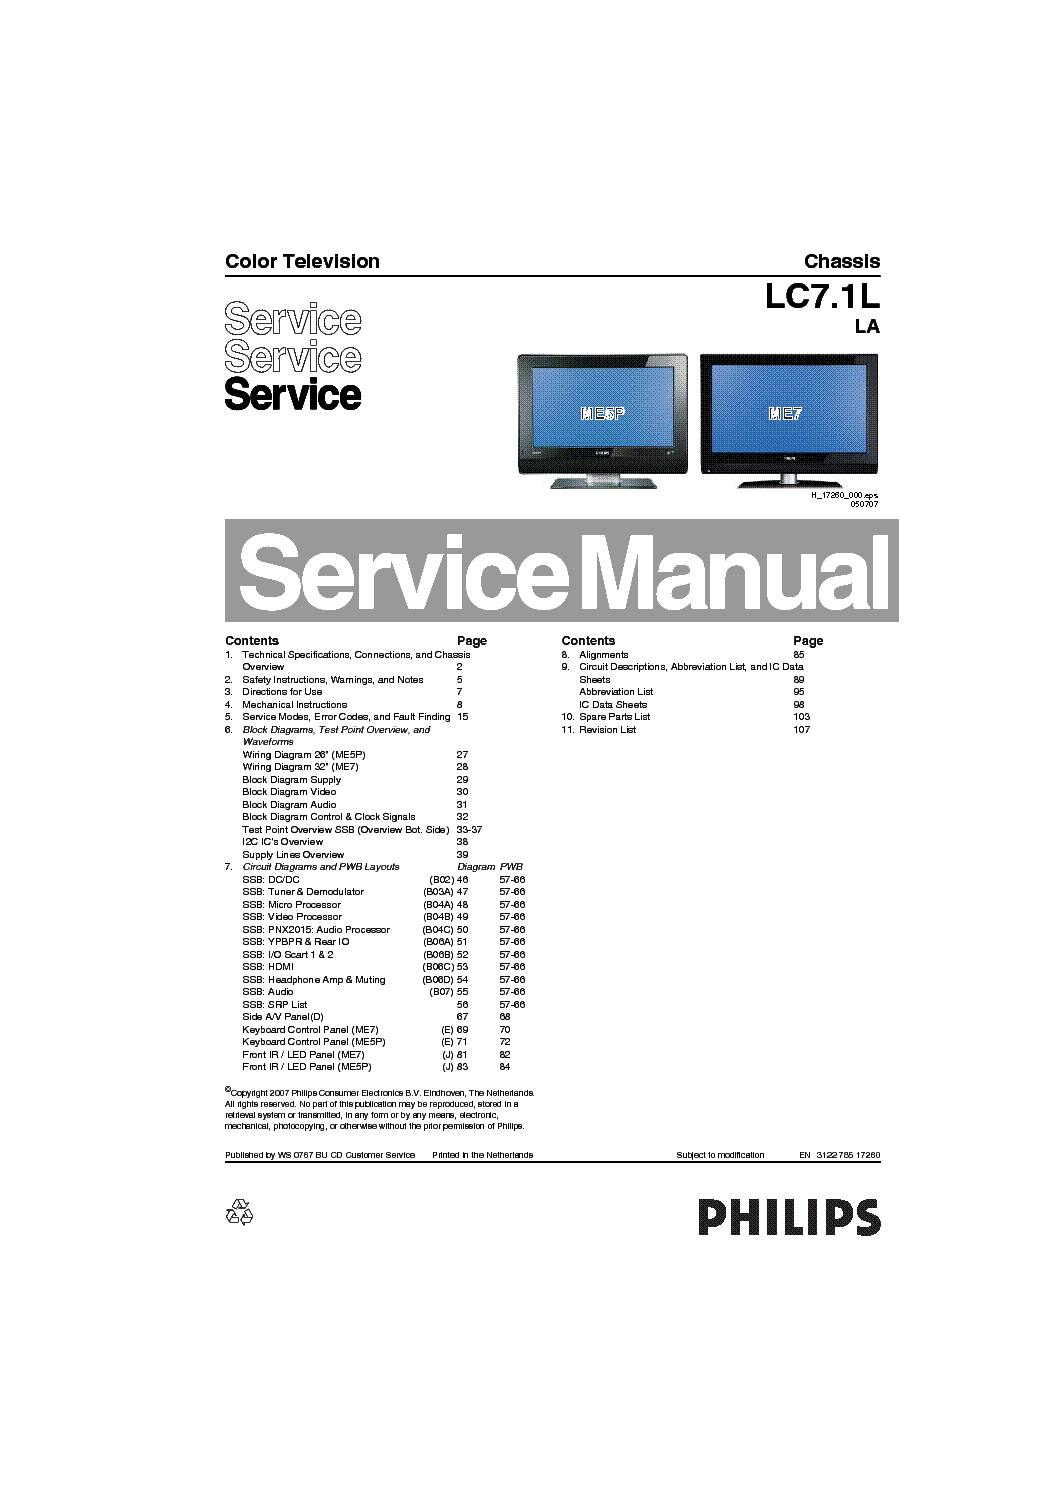 PHILIPS LC7.1LLA 312278517260 service manual (1st page)